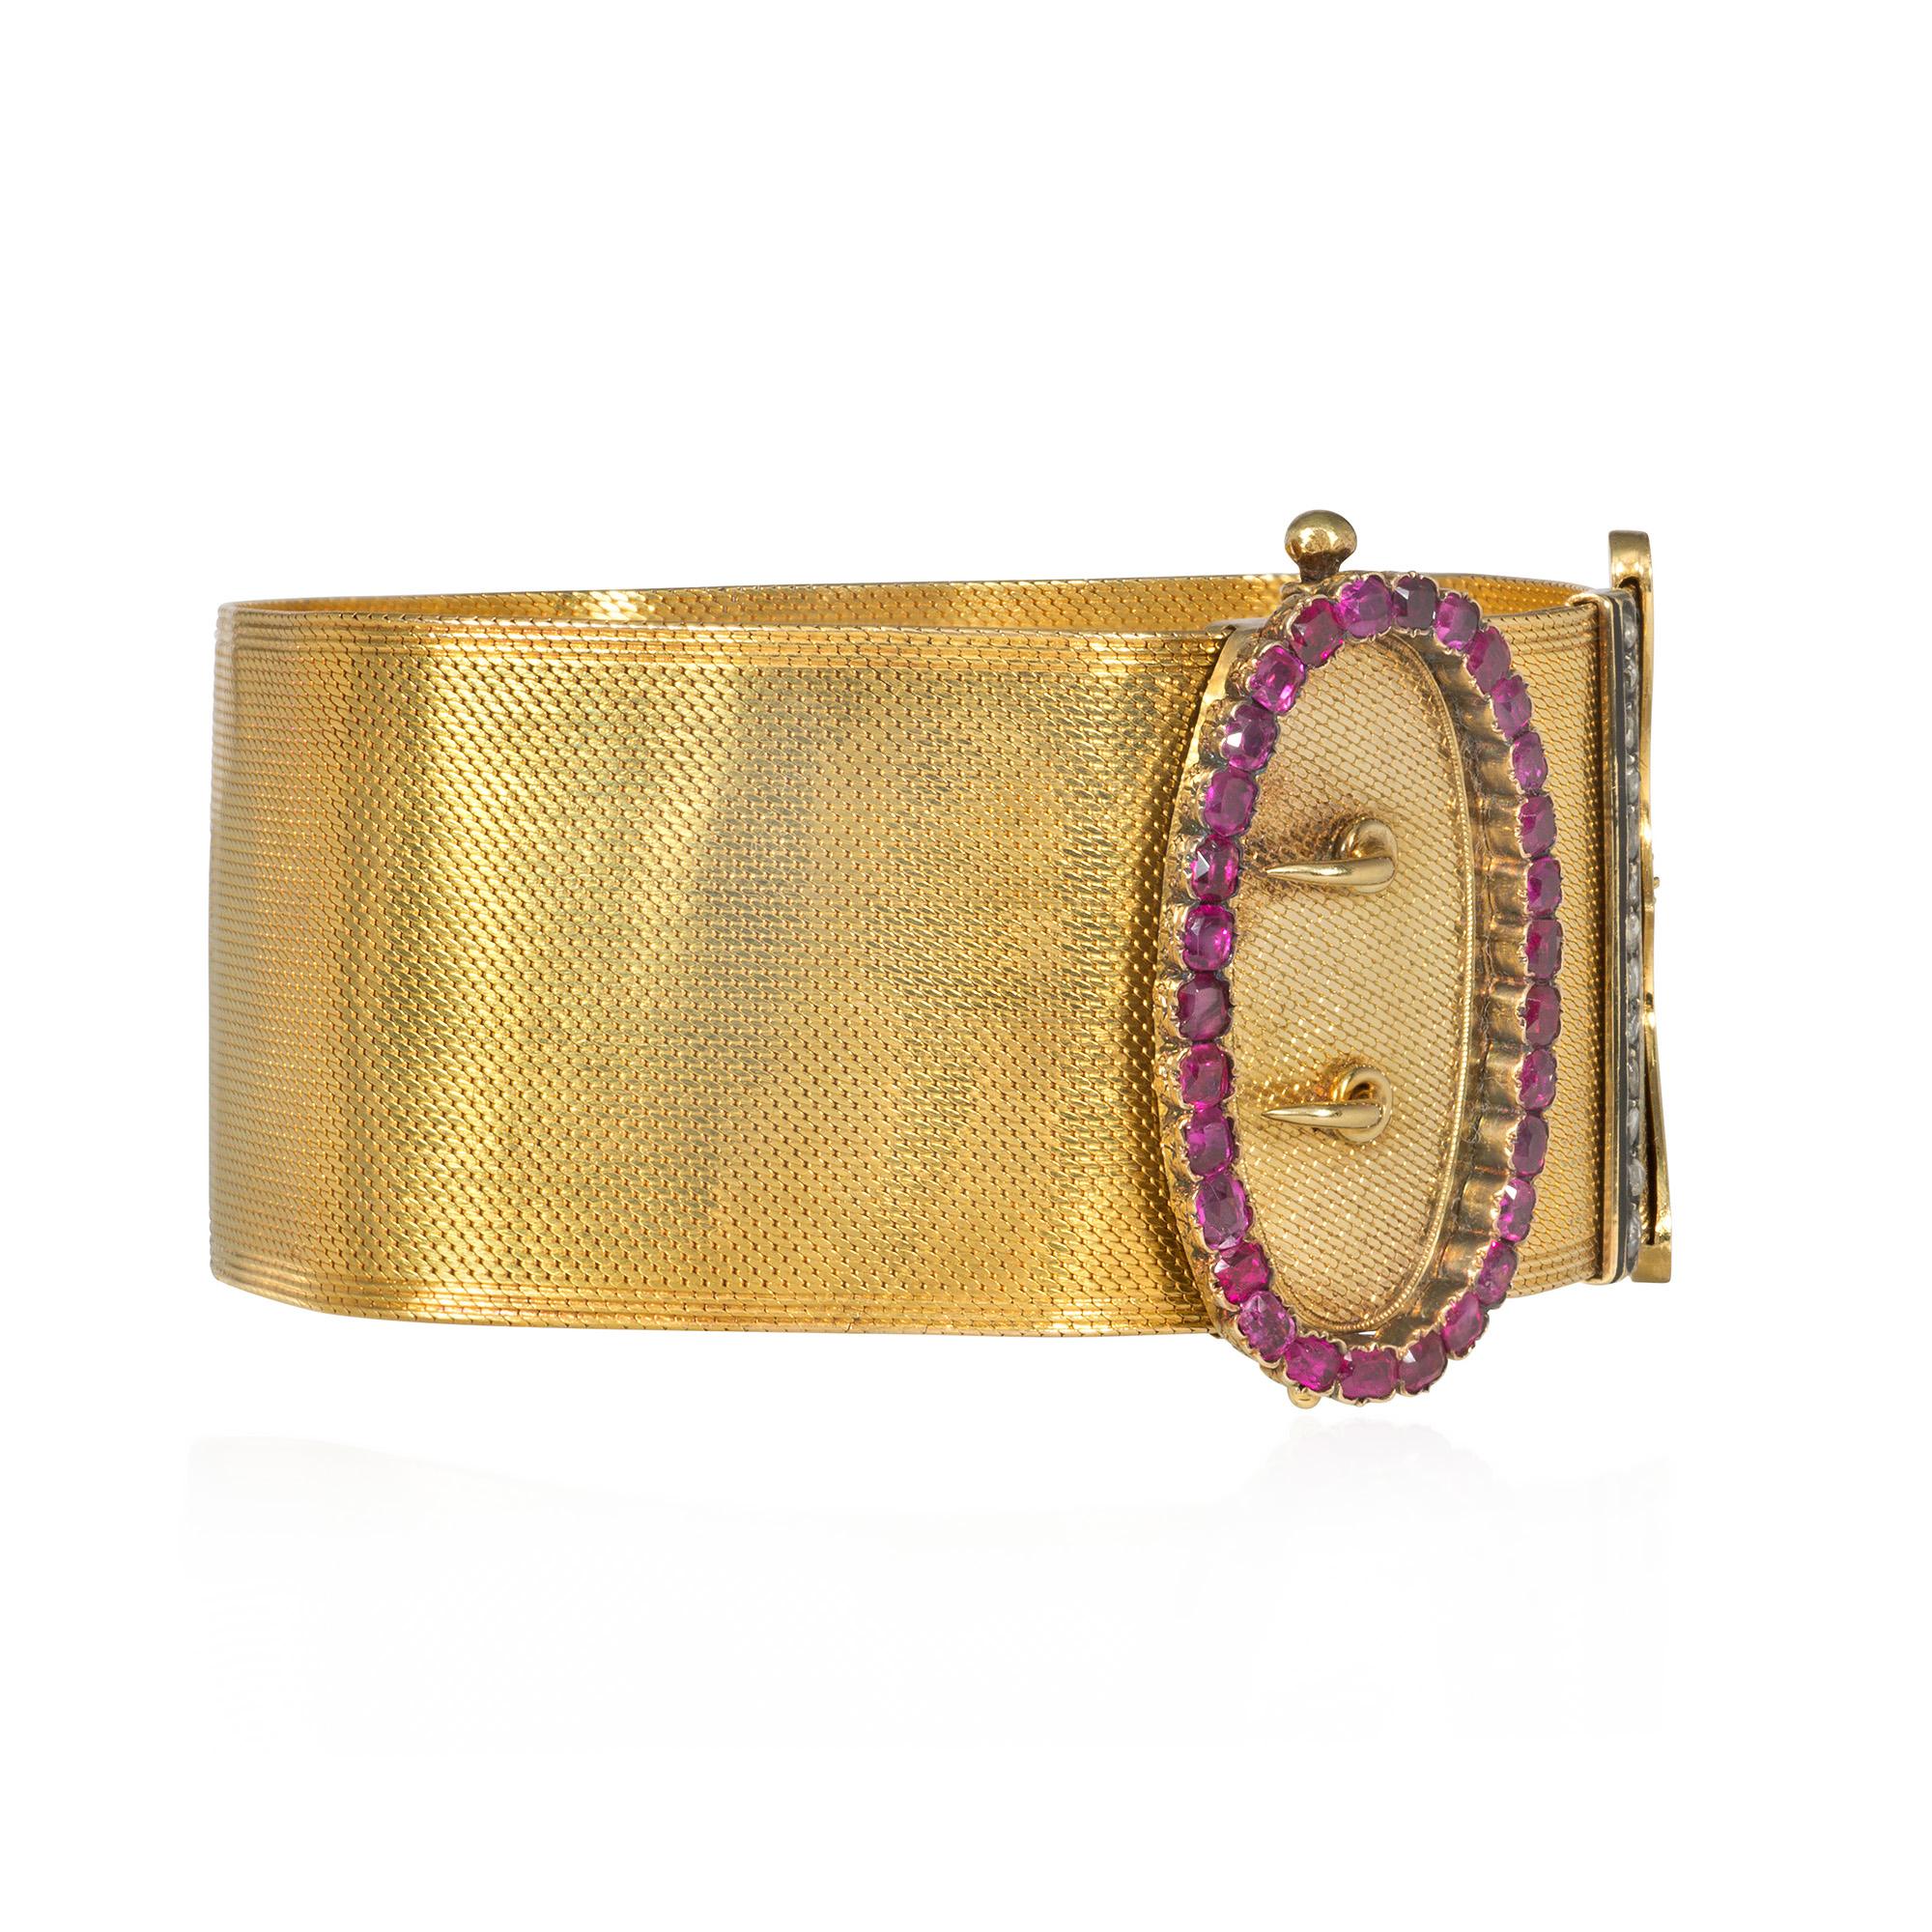 An antique woven gold jarretière slide bracelet designed as a buckled garter with cushion-cut ruby and rose-diamond fasteners and a scalloped terminal with black enamel Greek key decoration, in 18k. France

Slide design allows it to fit various size